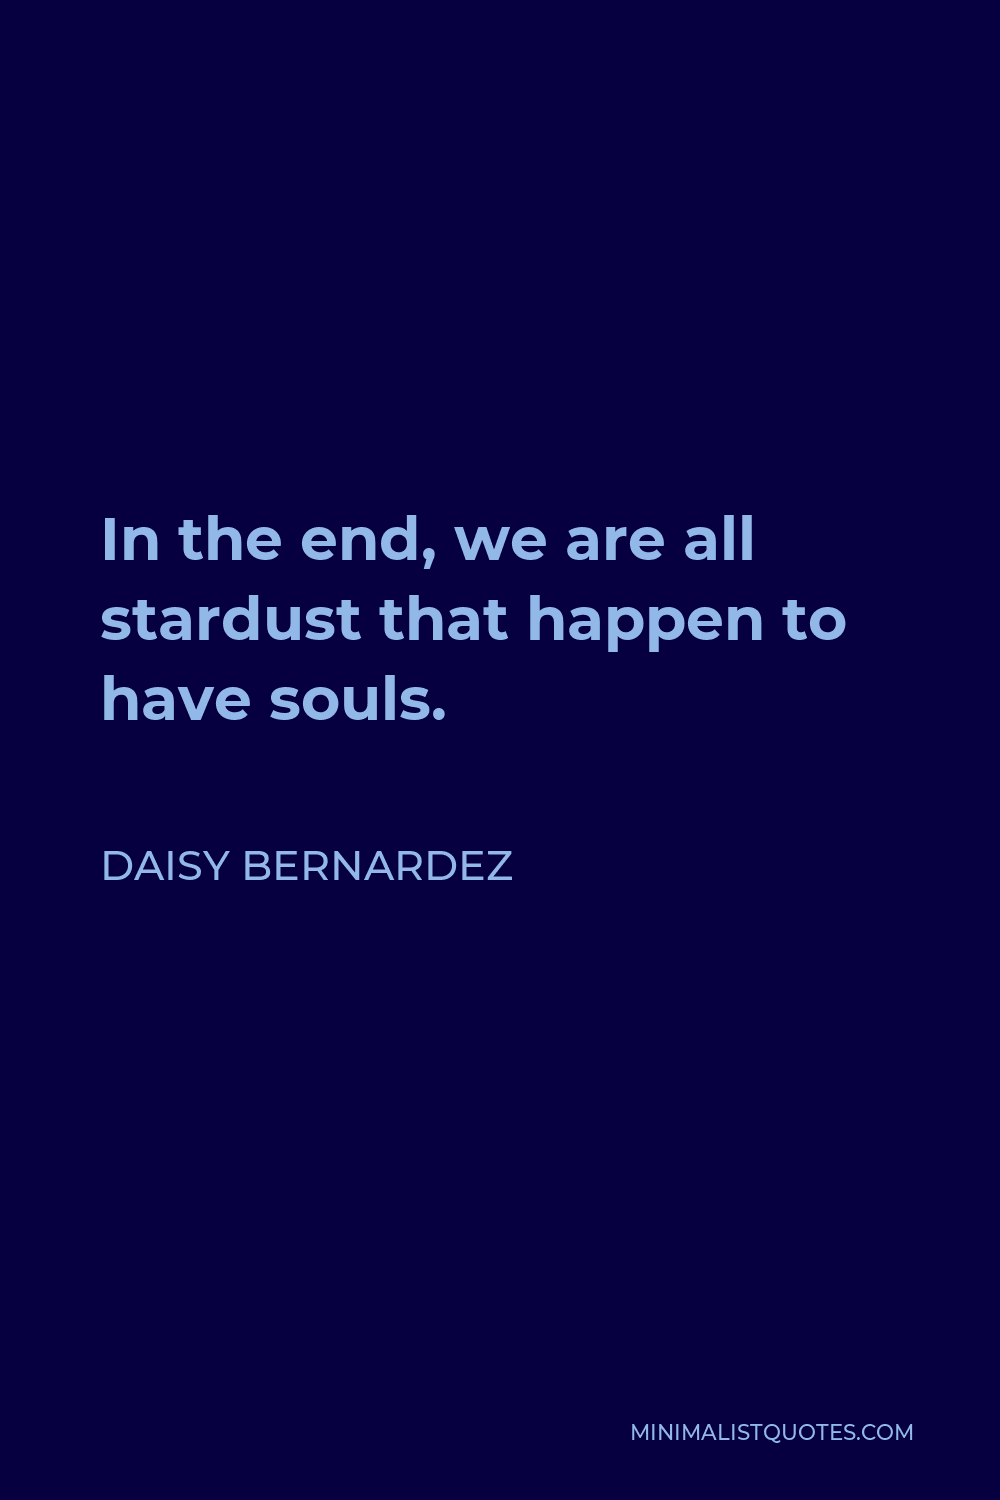 Daisy Bernardez Quote - In the end, we are all stardust that happen to have souls.